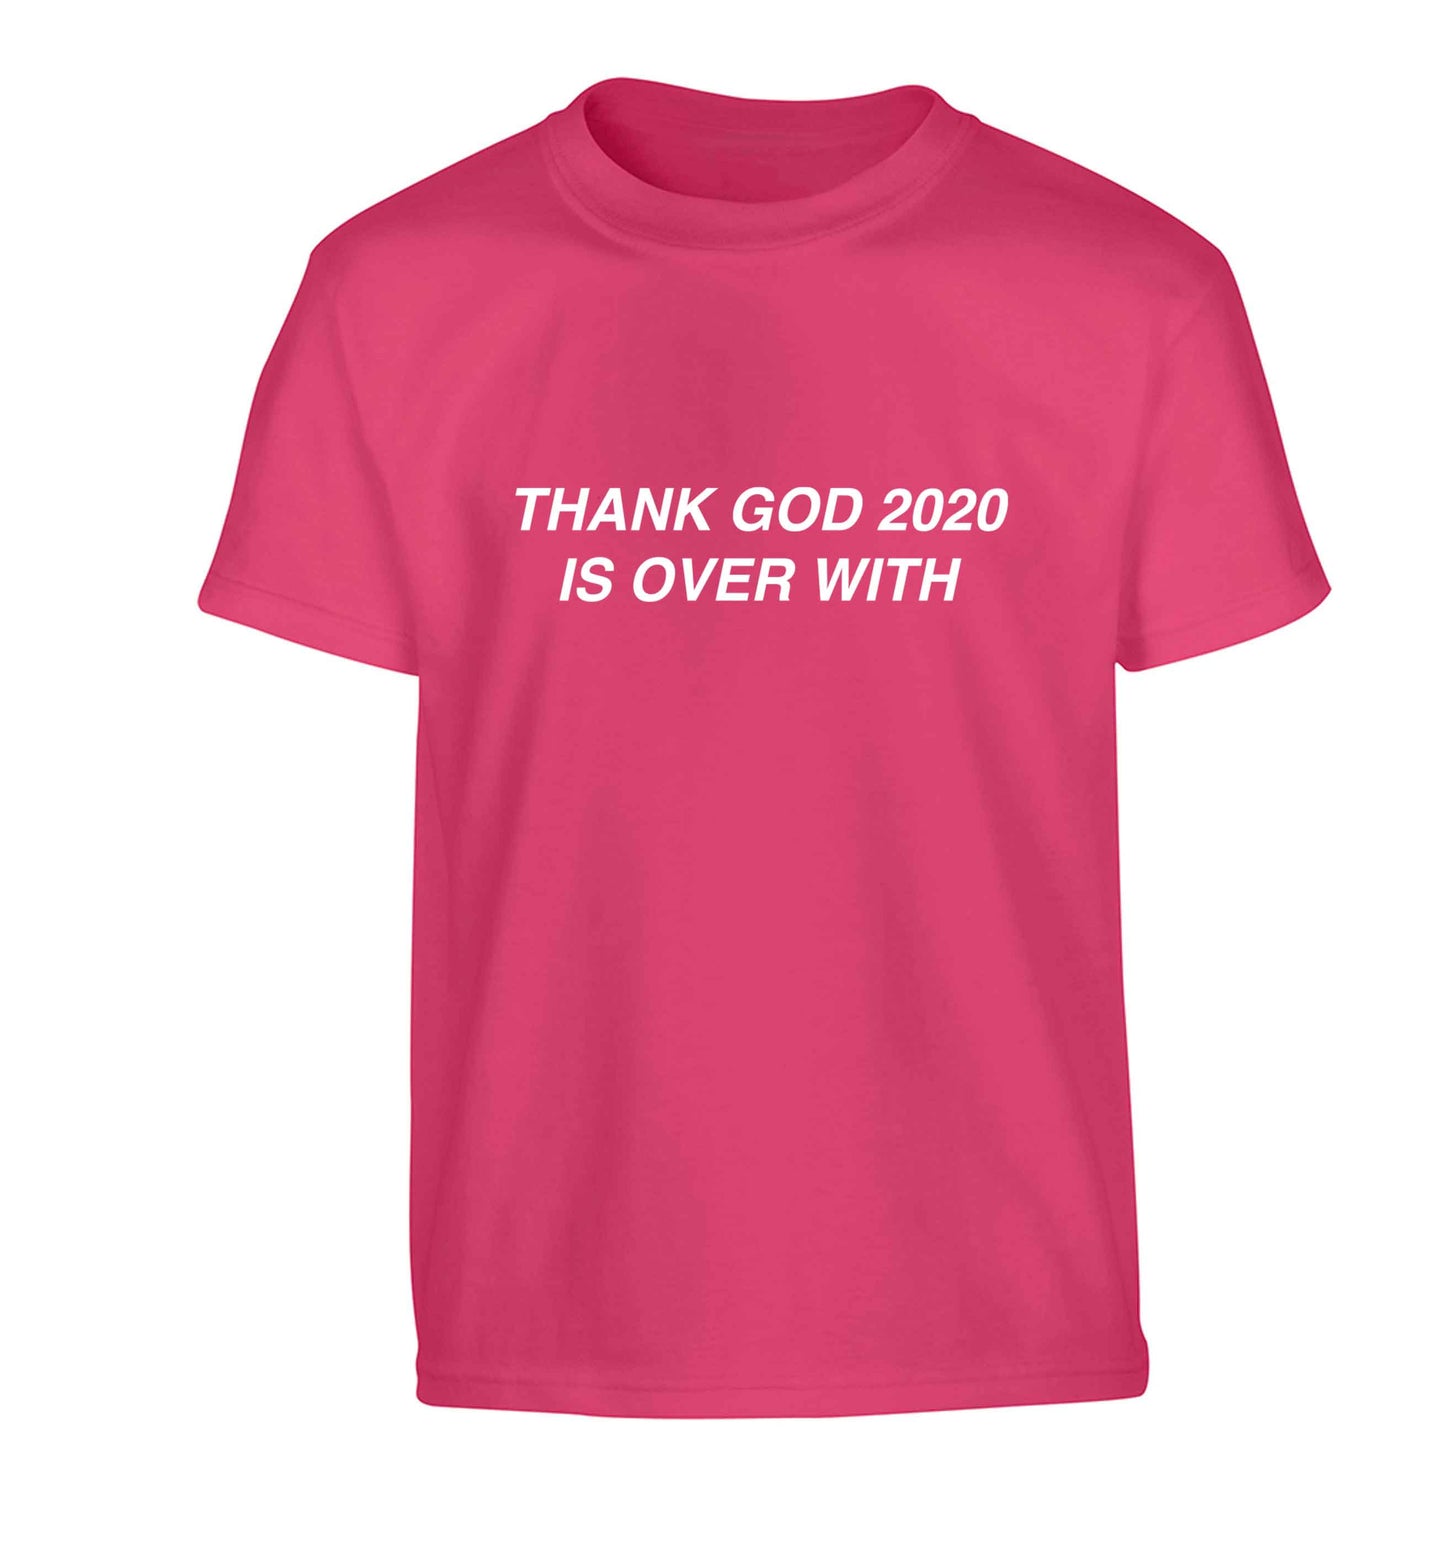 Thank god 2020 is over with Children's pink Tshirt 12-13 Years